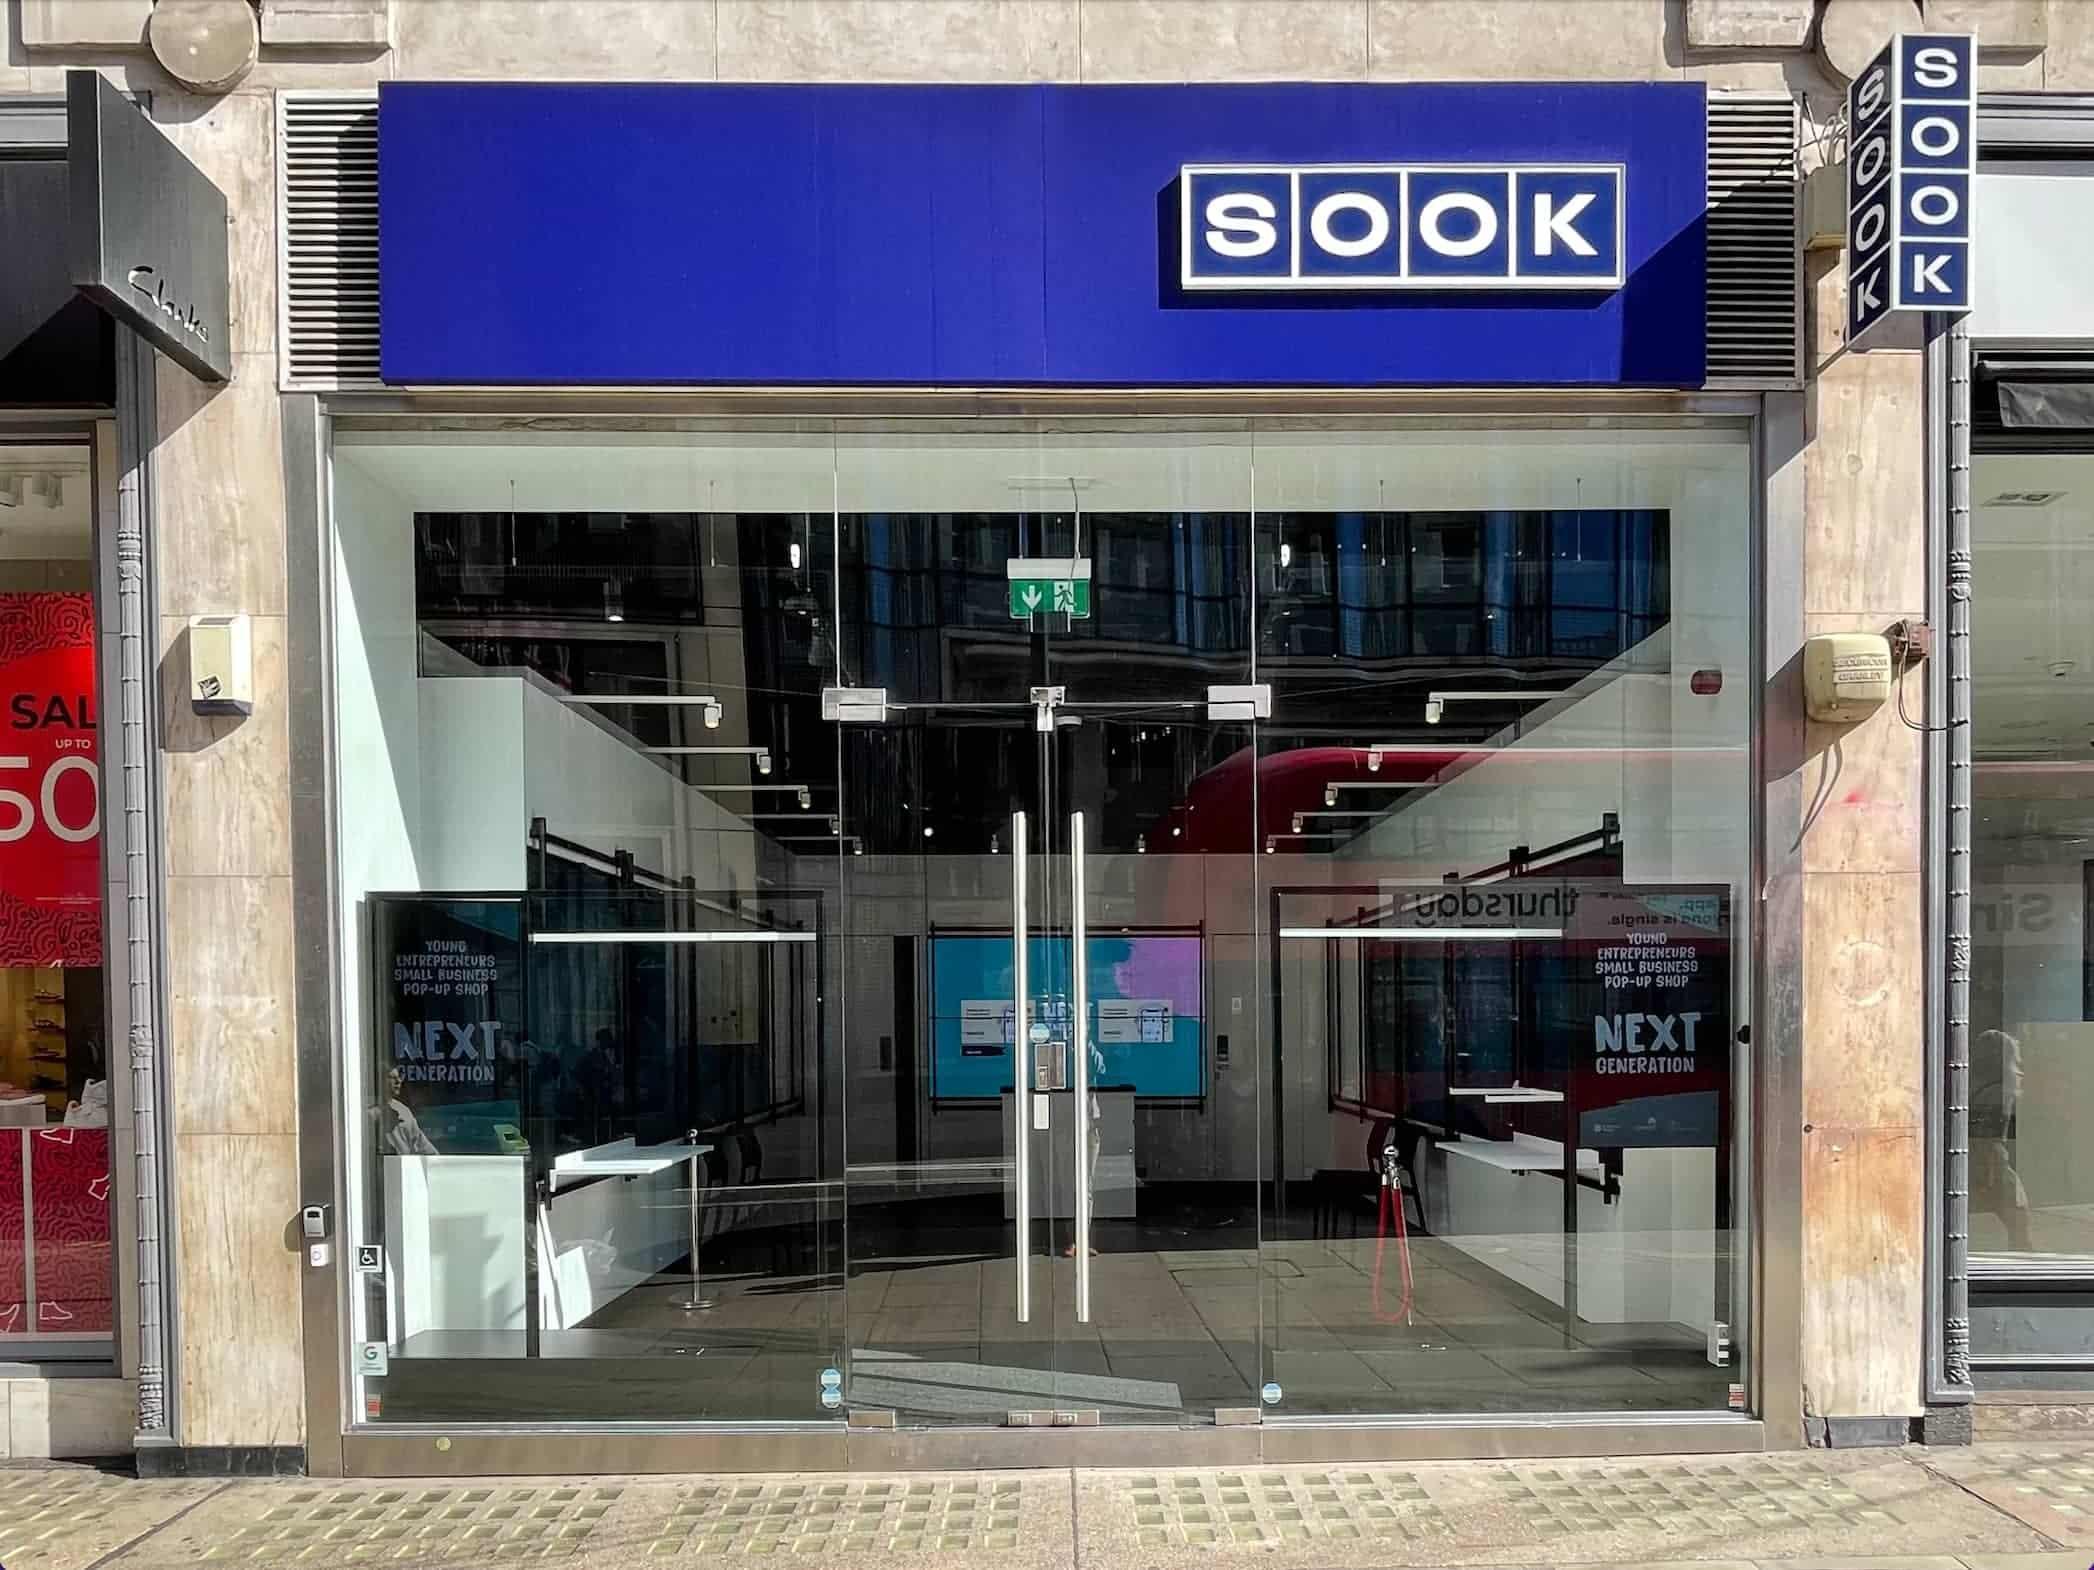 Exterior of Sook space in Oxford Street with Sook signage above the shop